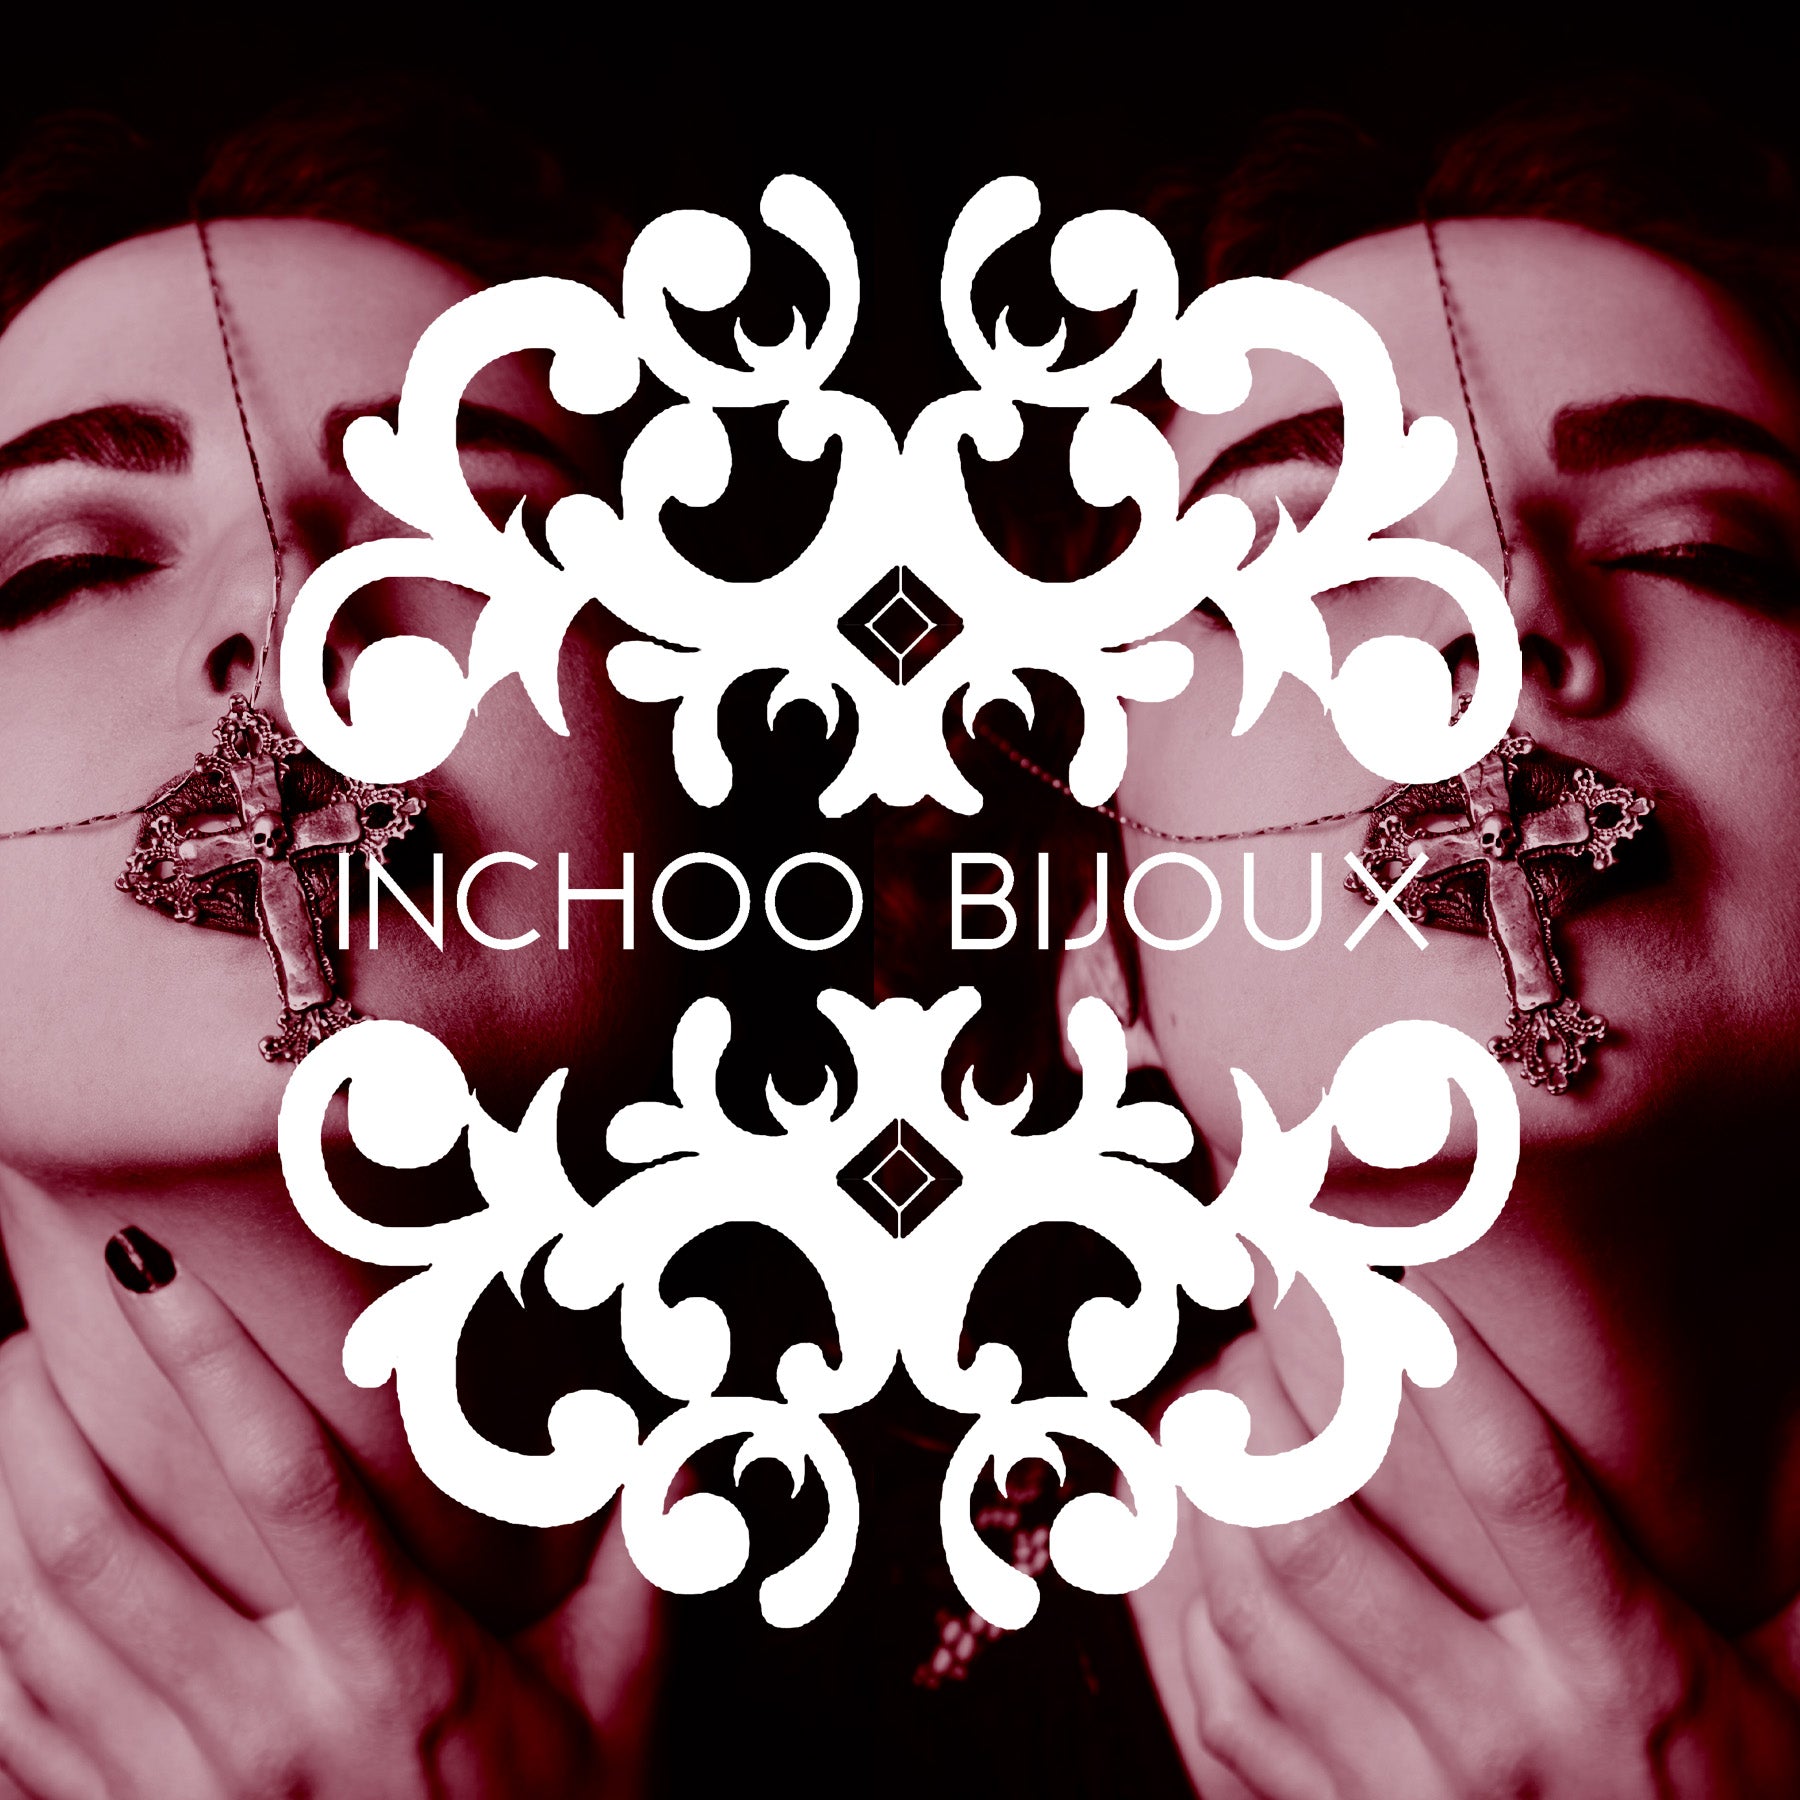 2021, what a YEAR for Inchoo Bijoux!